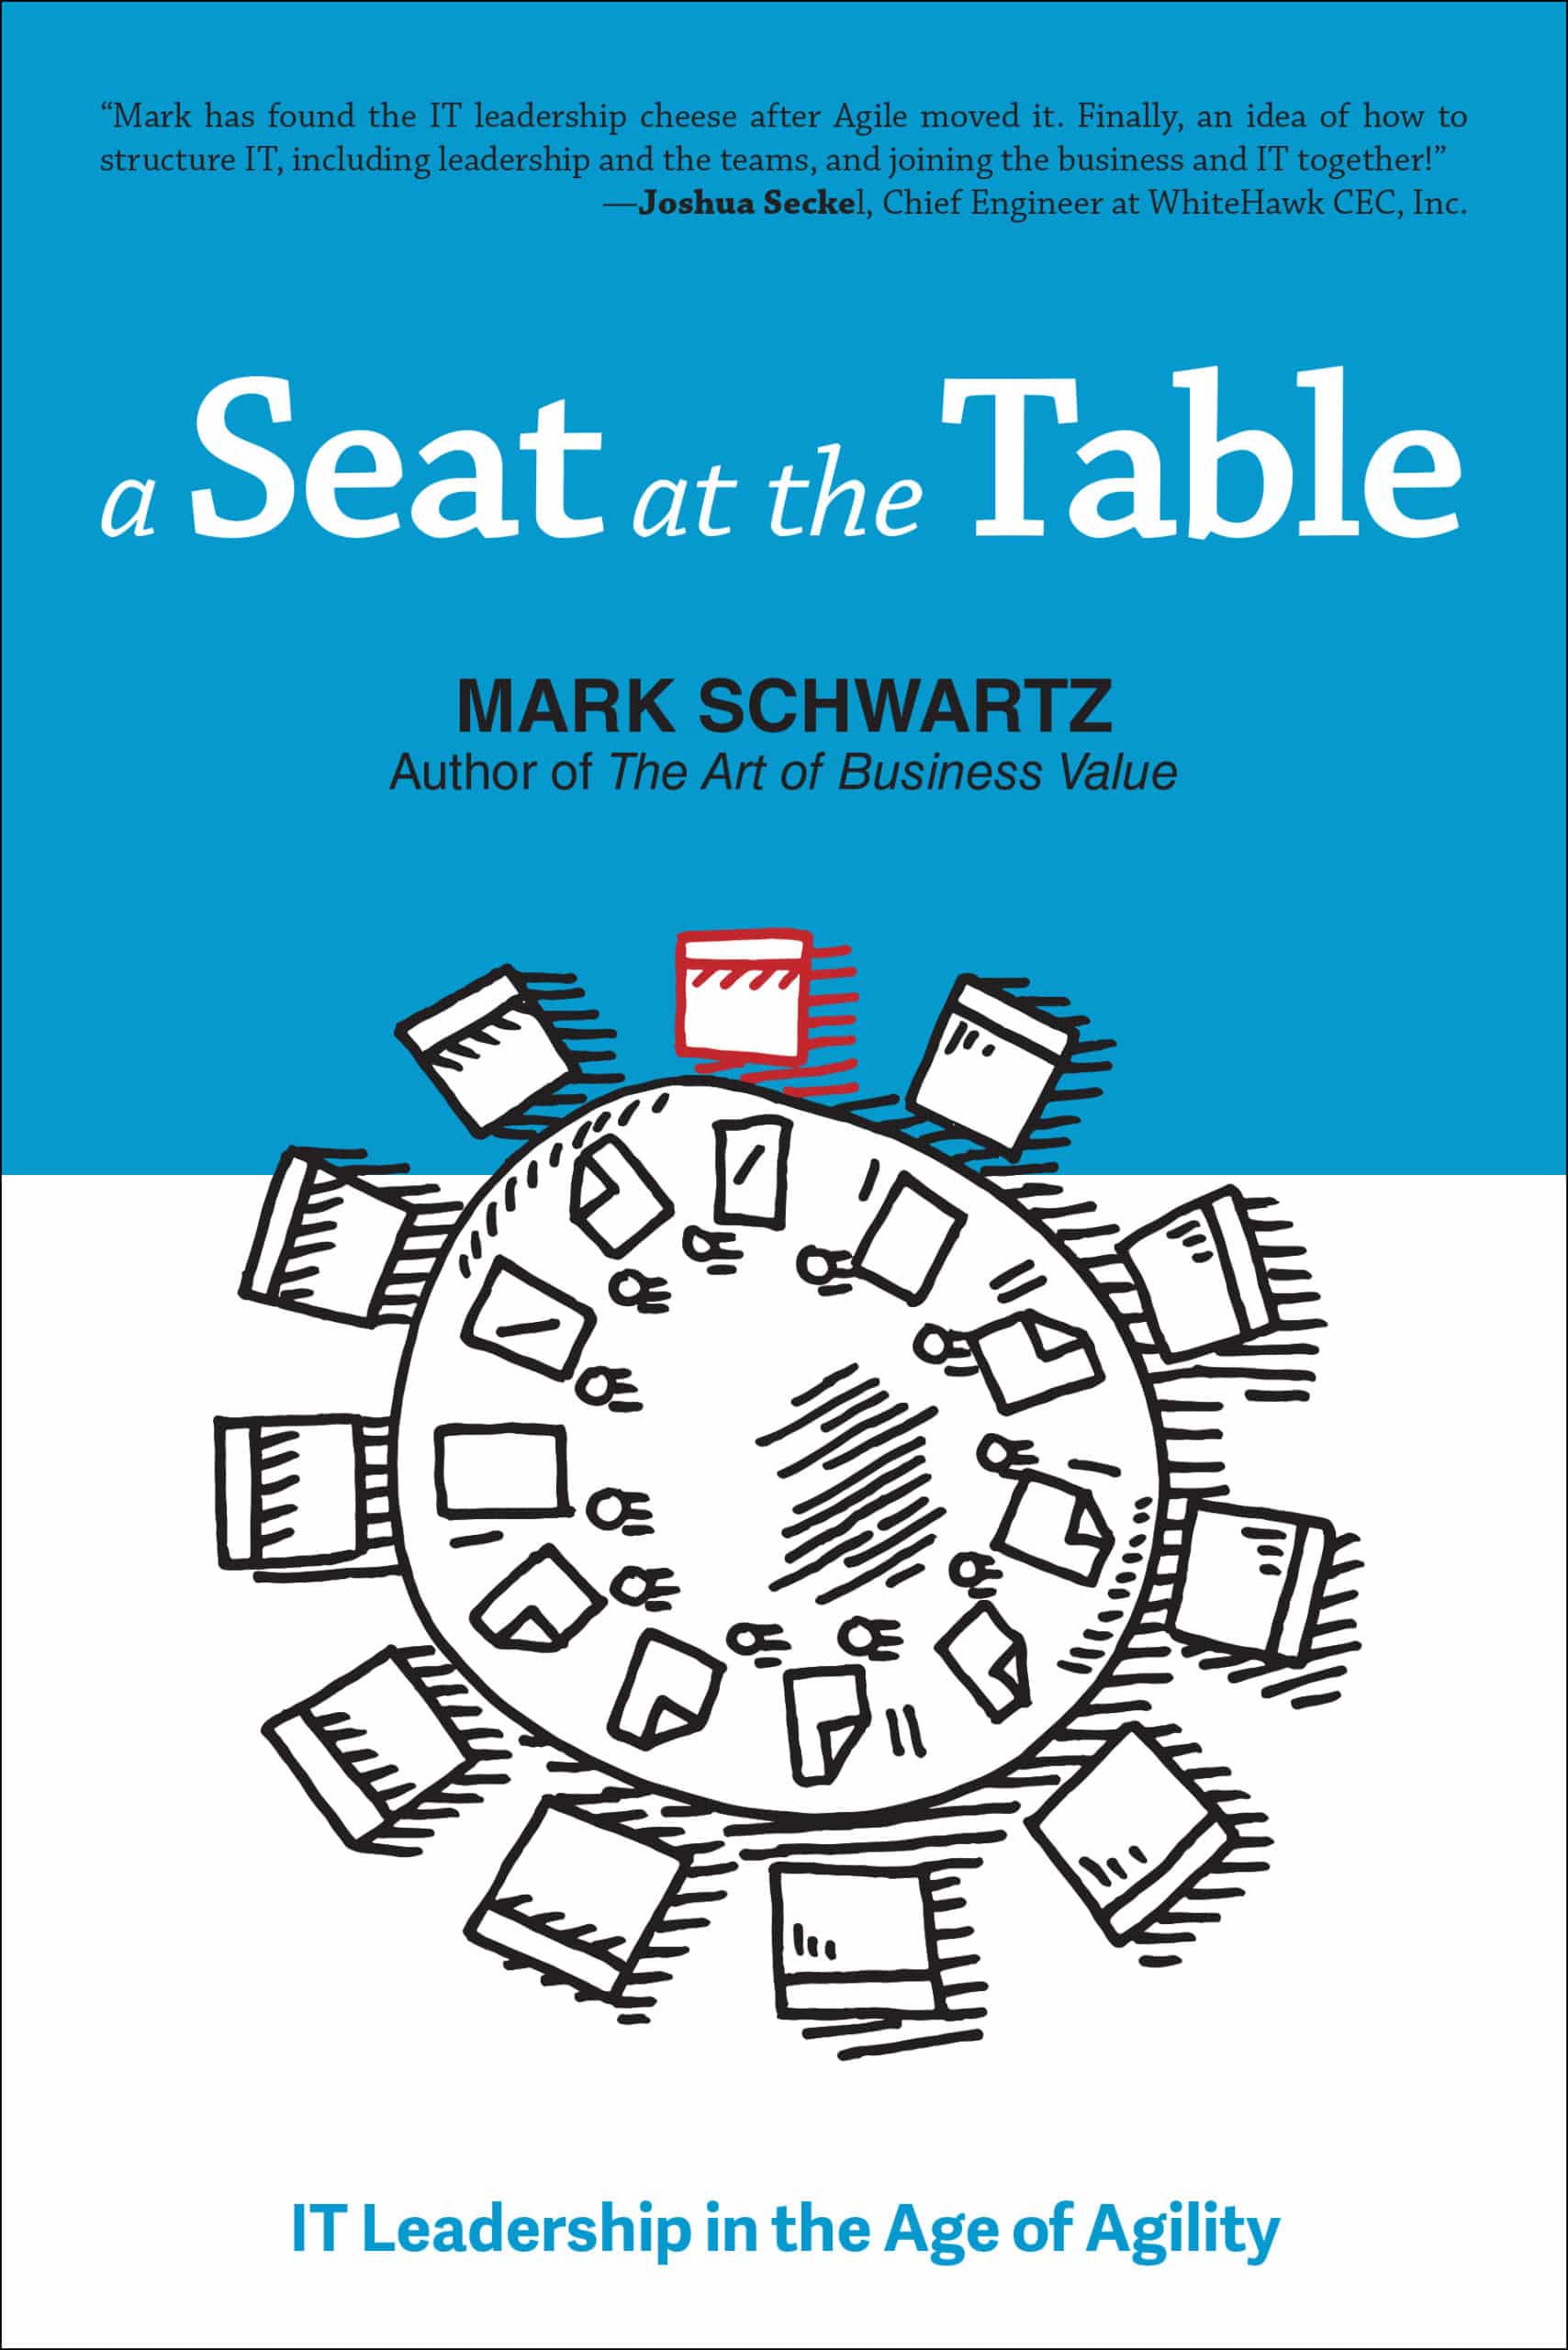 Cover of A Seat at the Table: IT Leadership in the Age of Agility by Mark Schwartz, in which we discuss governance and oversight in an Agile context.